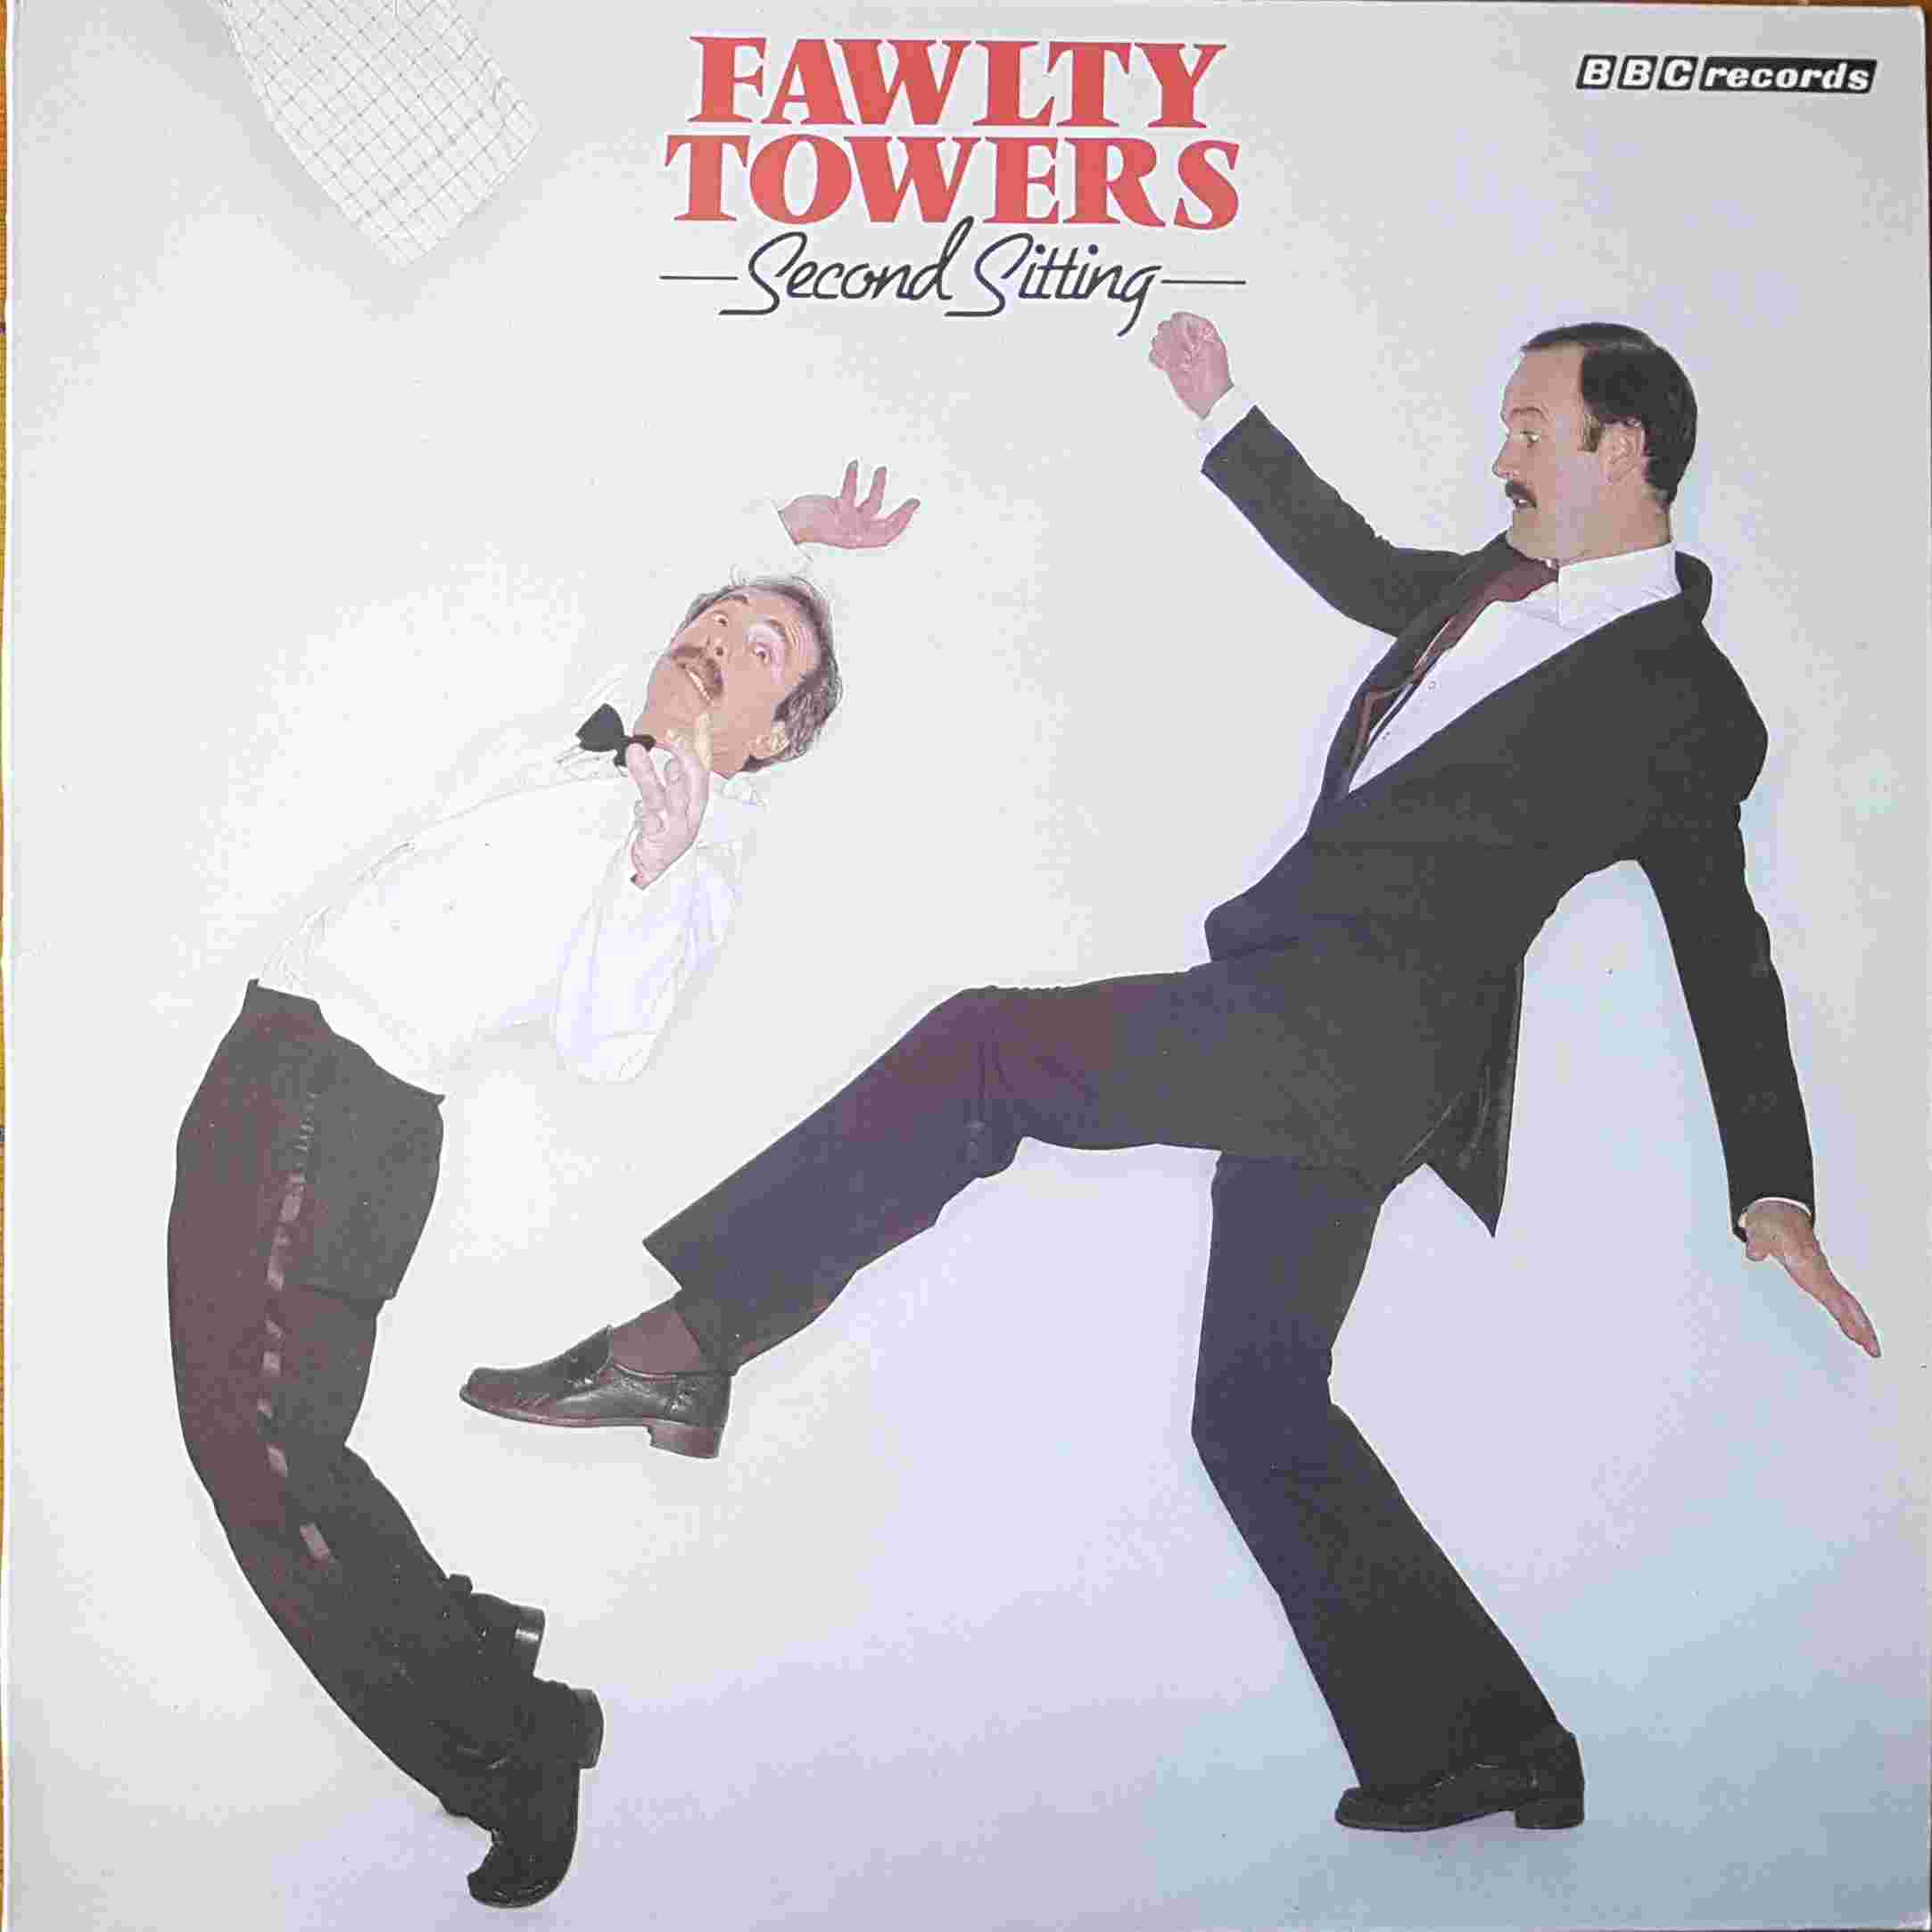 Picture of REB 405 Fawlty Towers - Second sitting by artist John Cleese / Connie Booth from the BBC albums - Records and Tapes library